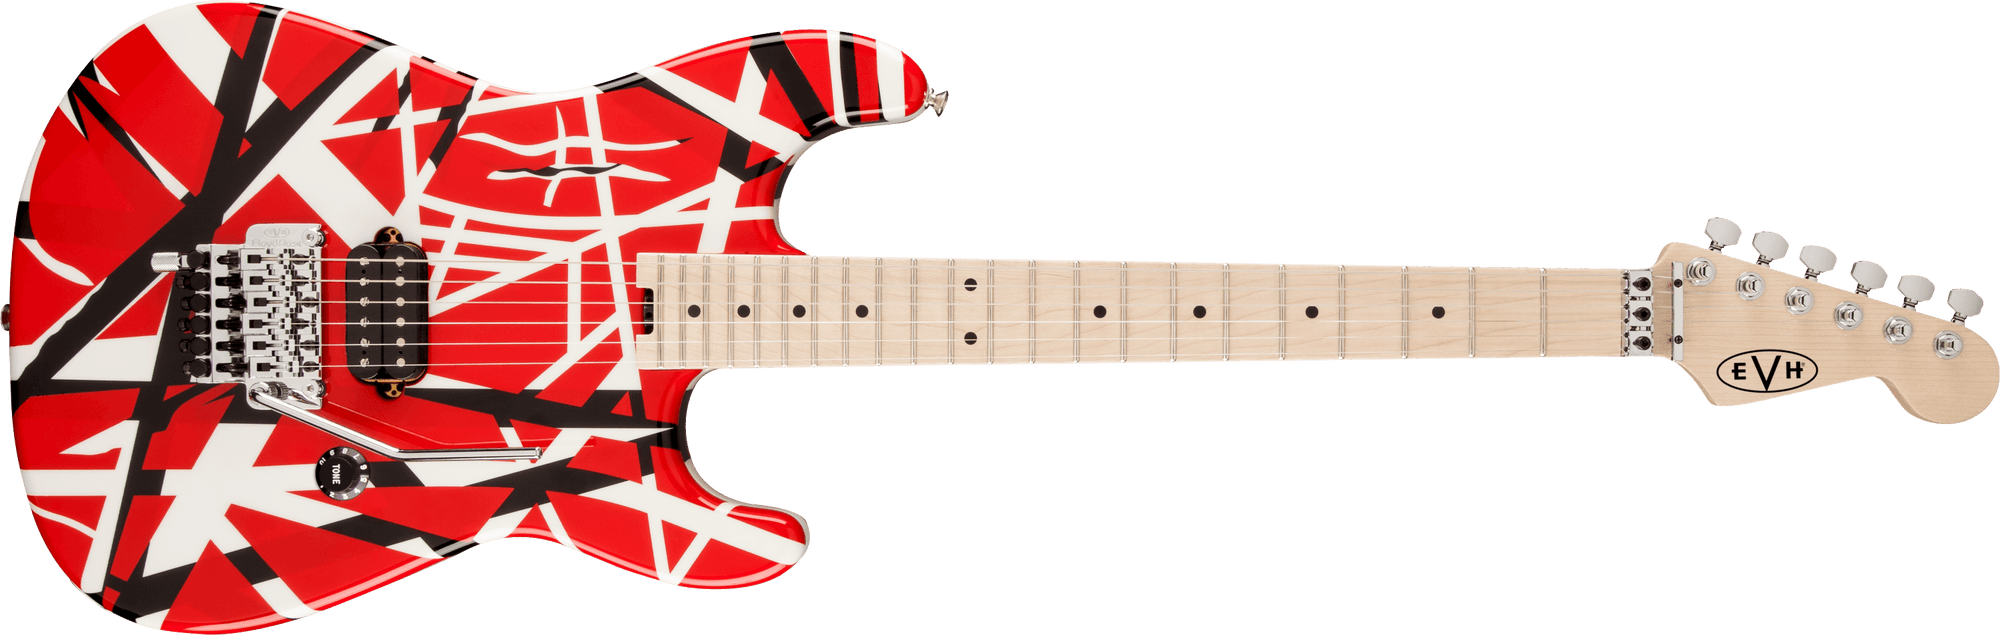 EVH Stripe Series Electric Guitar in Red, Black and White